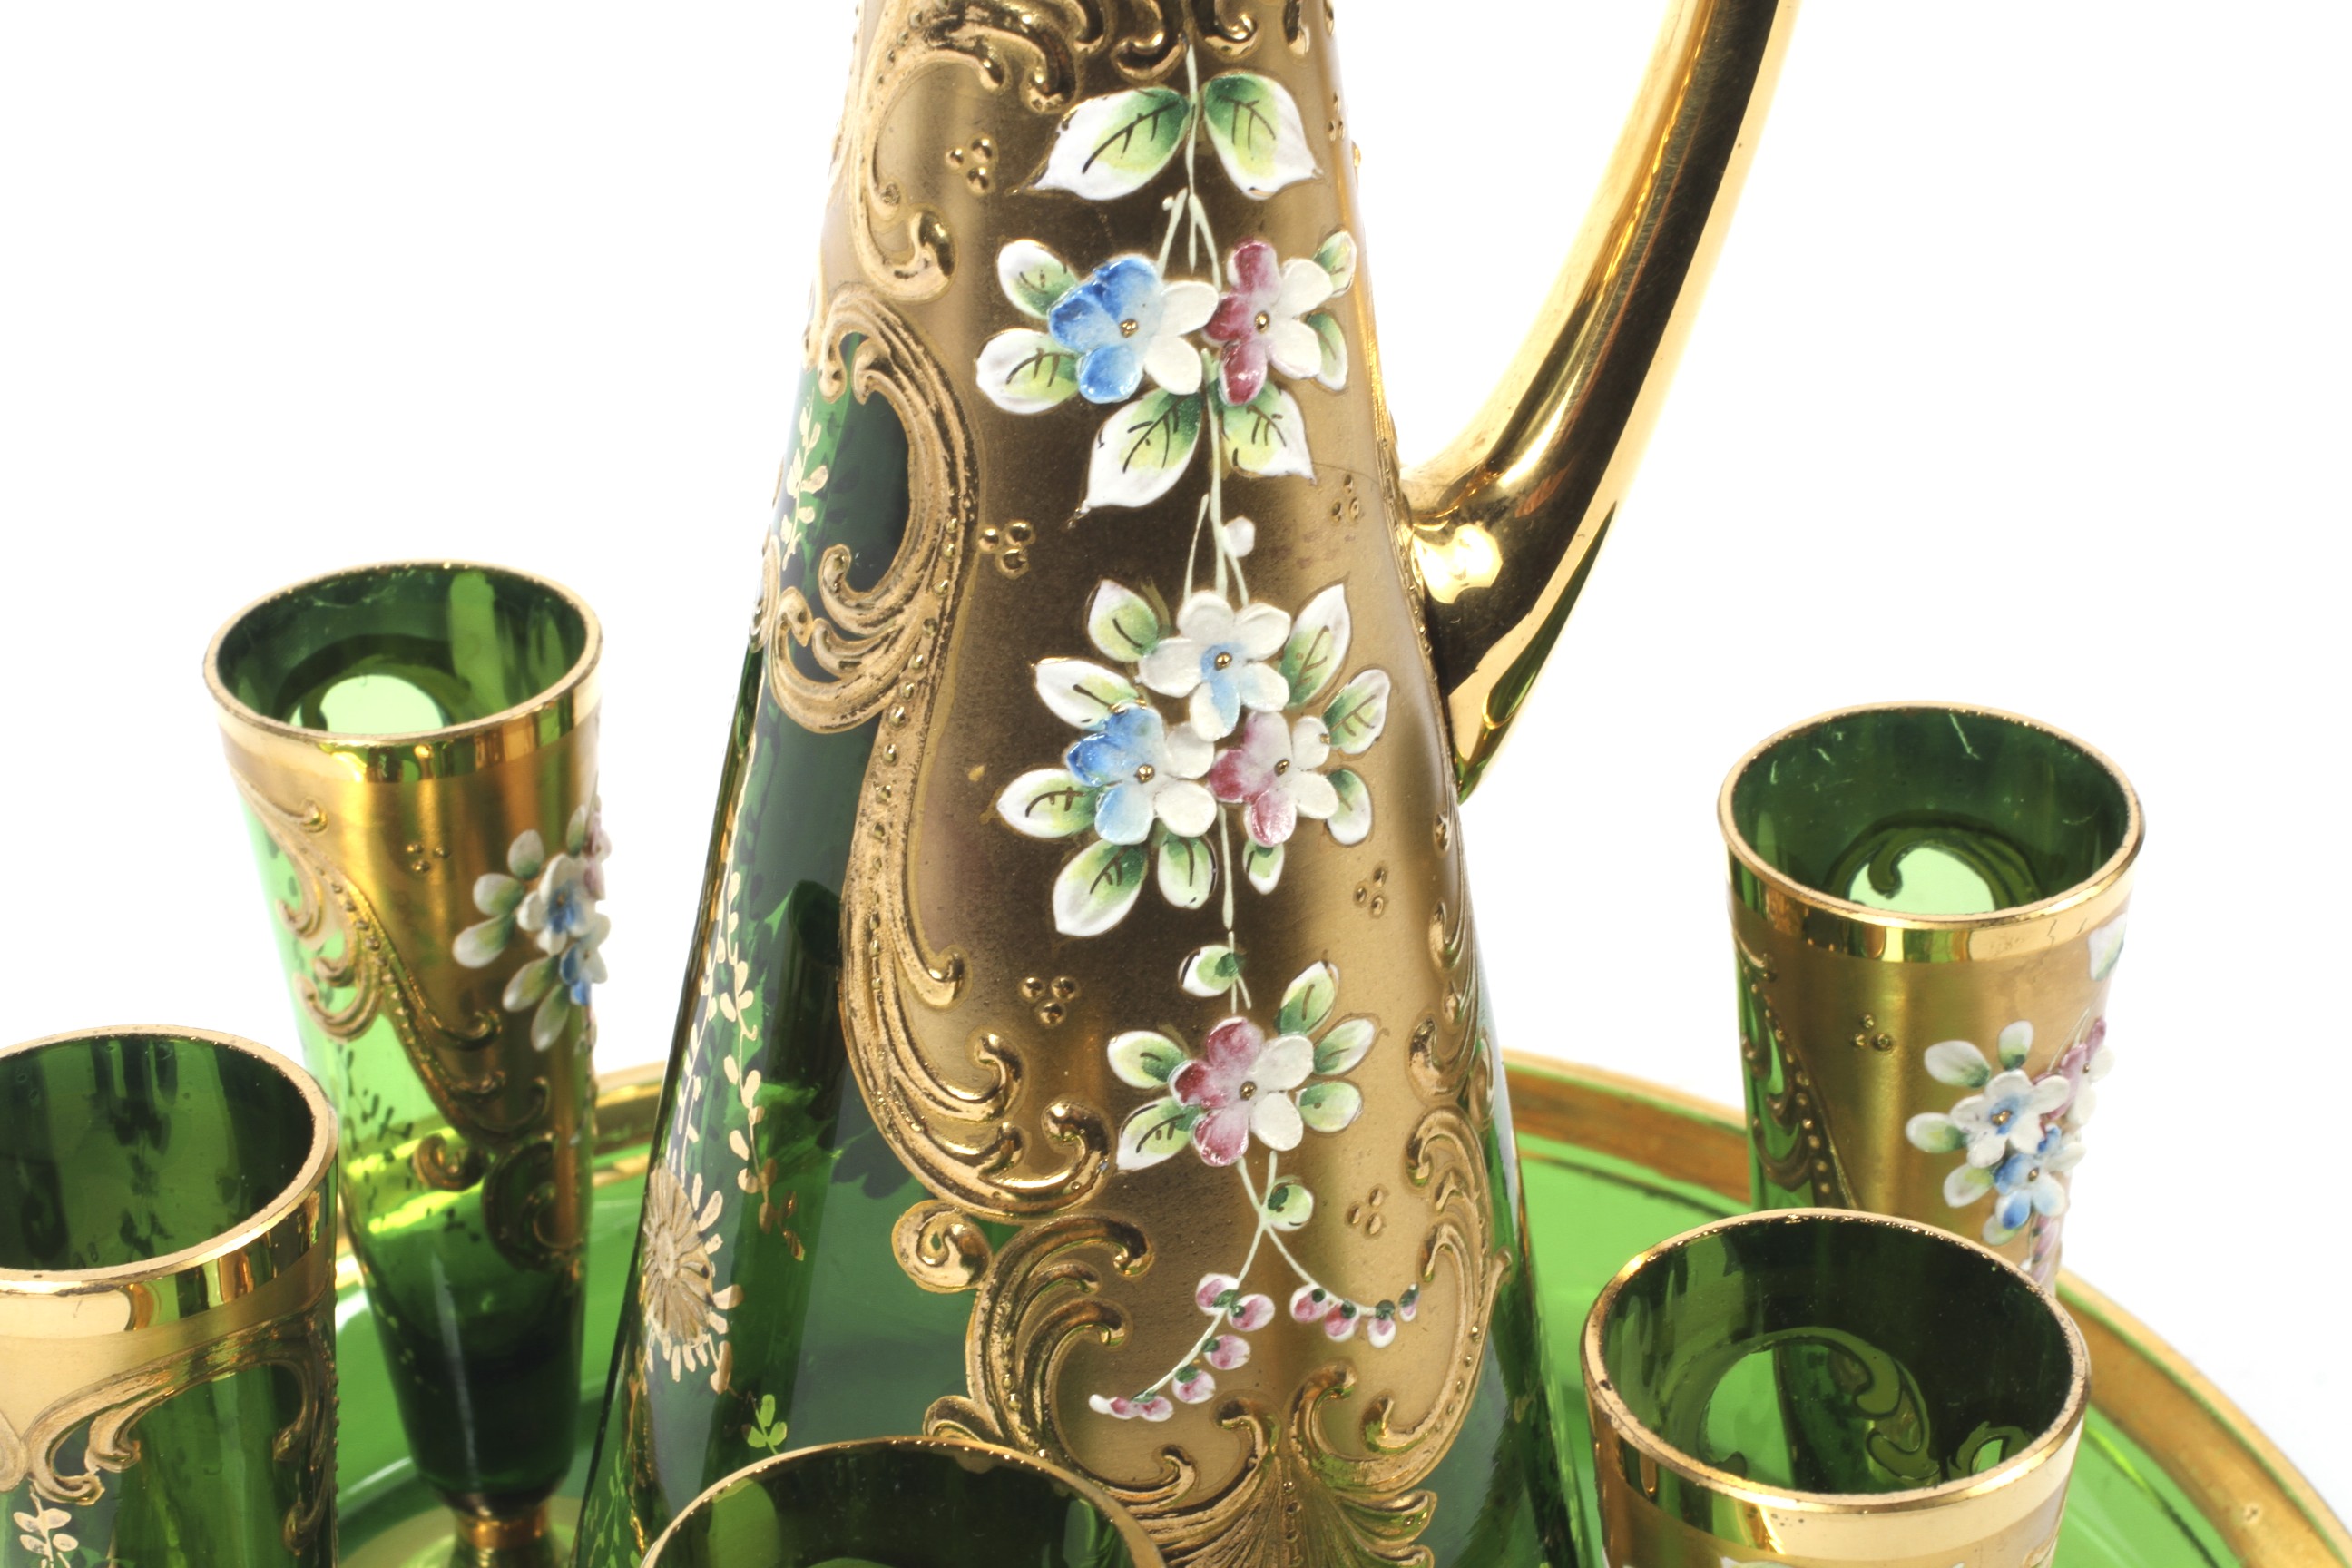 An Italian gilt and enamelled green glass decanter, stopper, circular tray and six glasses. - Image 2 of 2